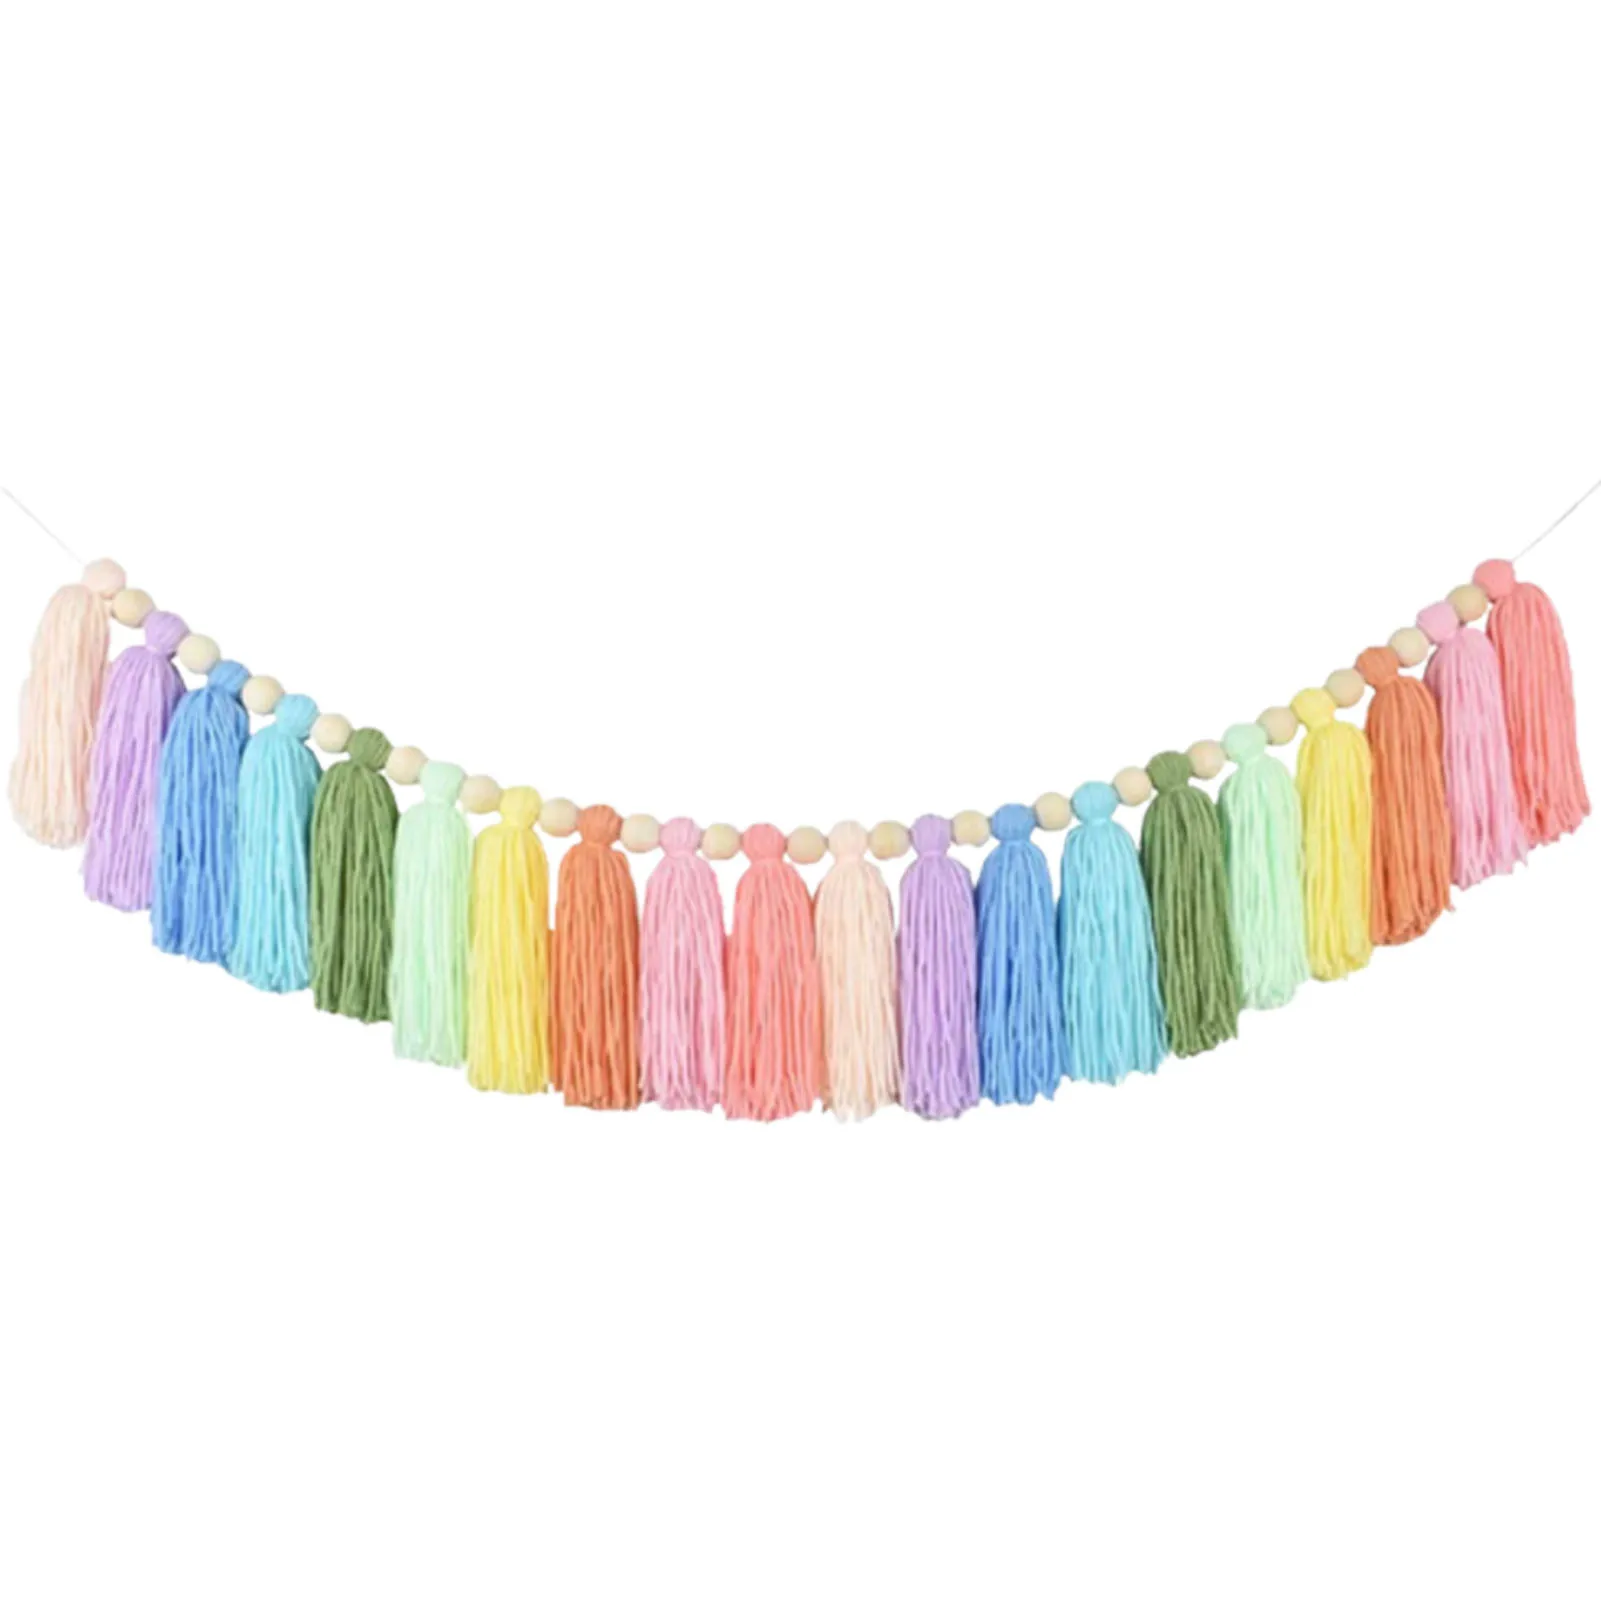 

Tassel Garland Tassel Wall Hanging Decor Pastel Tassel Banner With Wood Beads And Colorful Pom Pom Garlands Balls Garlands For